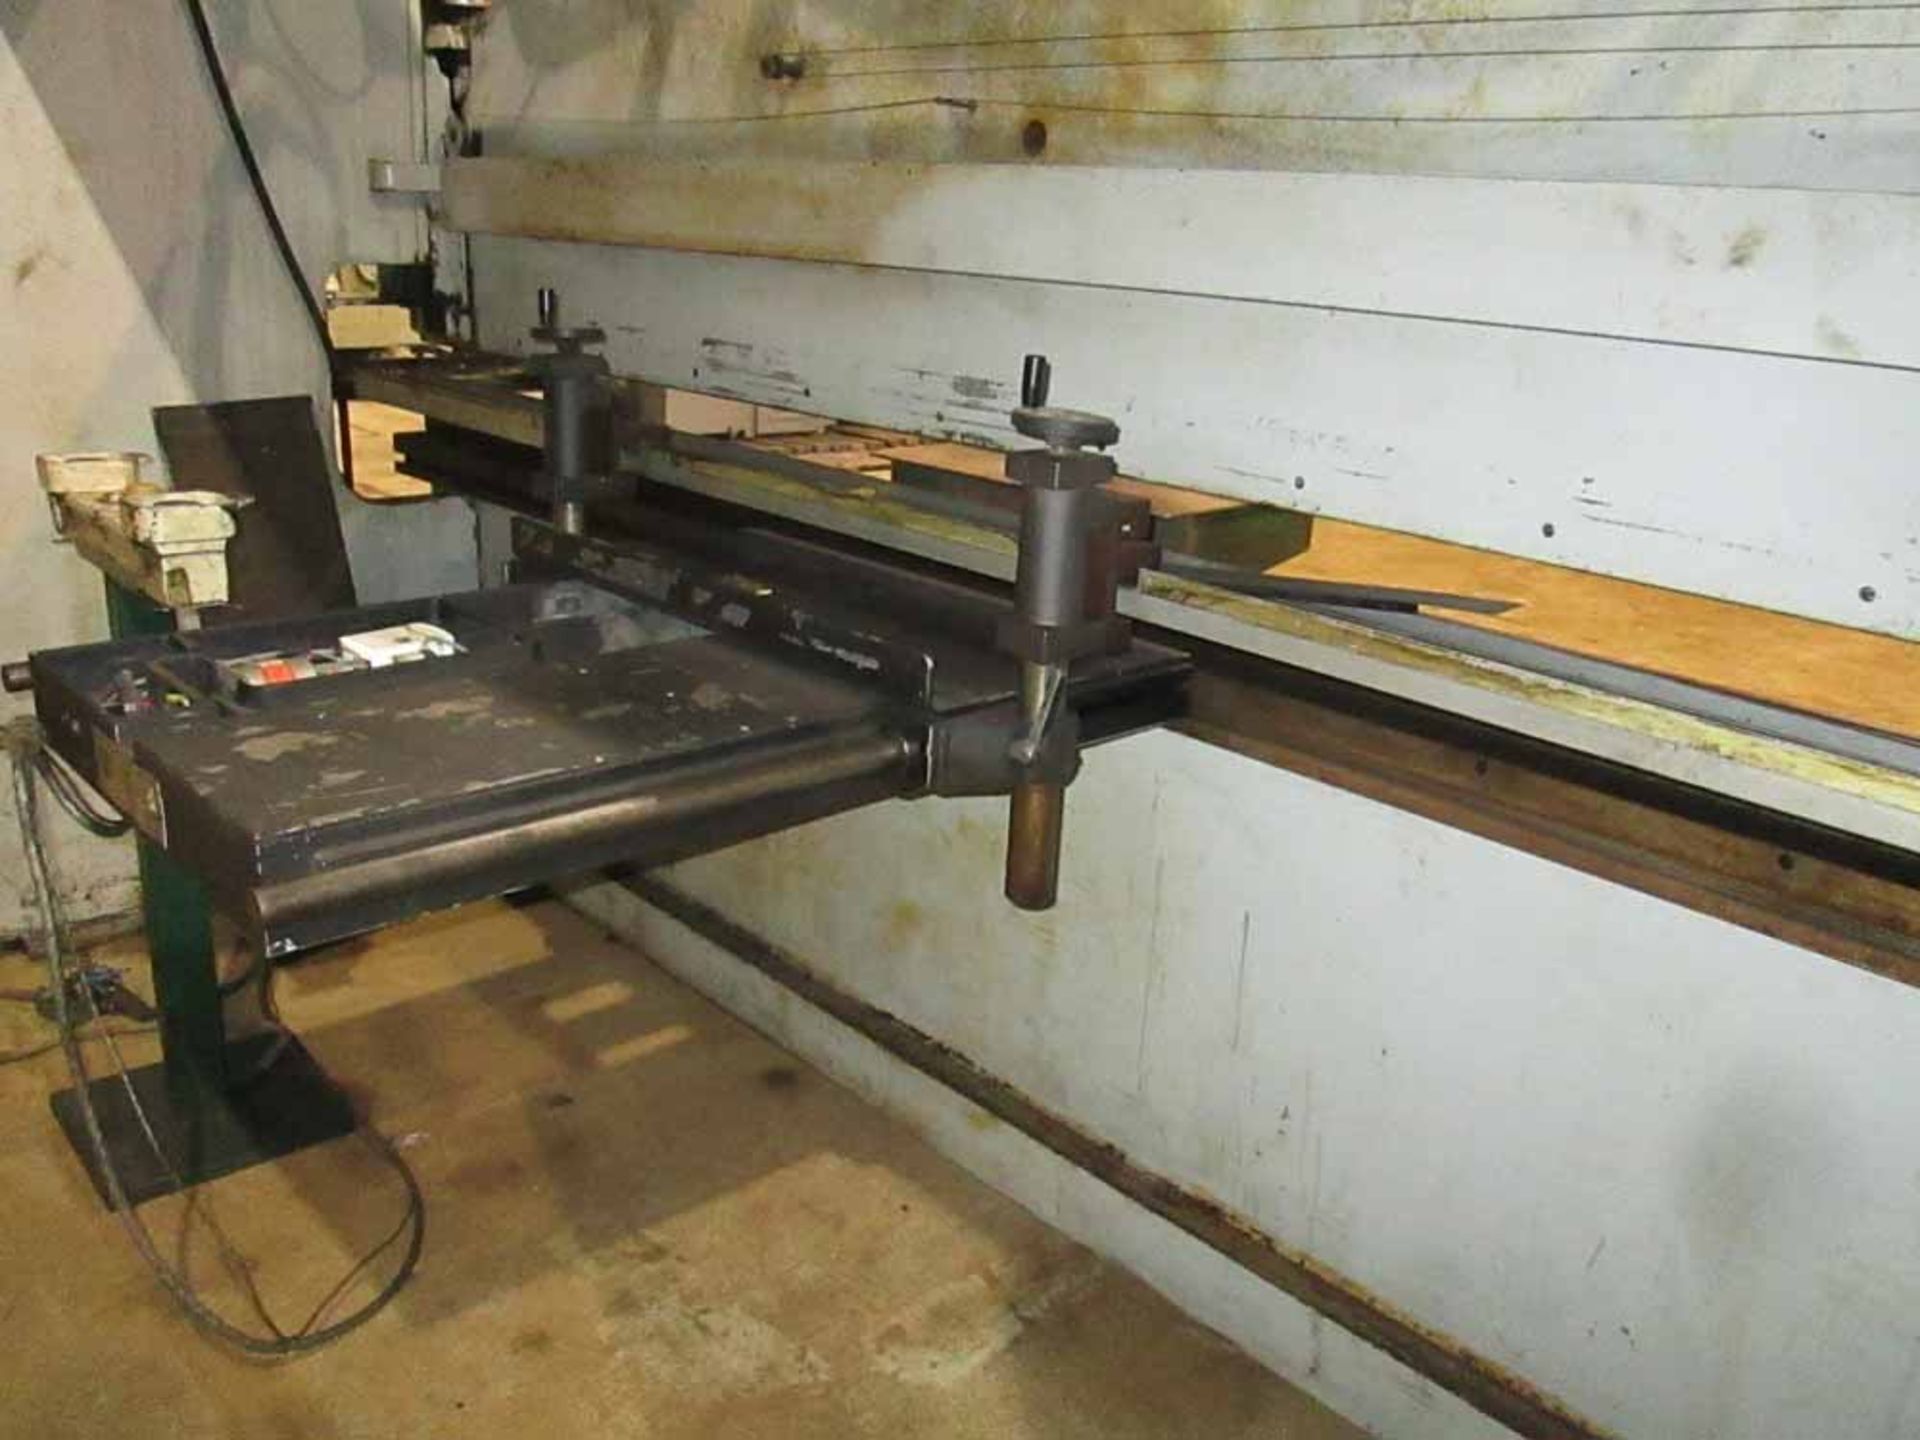 Pacific CNC 2 Axis Hyd. Press Brake, 110-Ton x 12' - Located In Painesville, OH - 6426 - Image 10 of 12